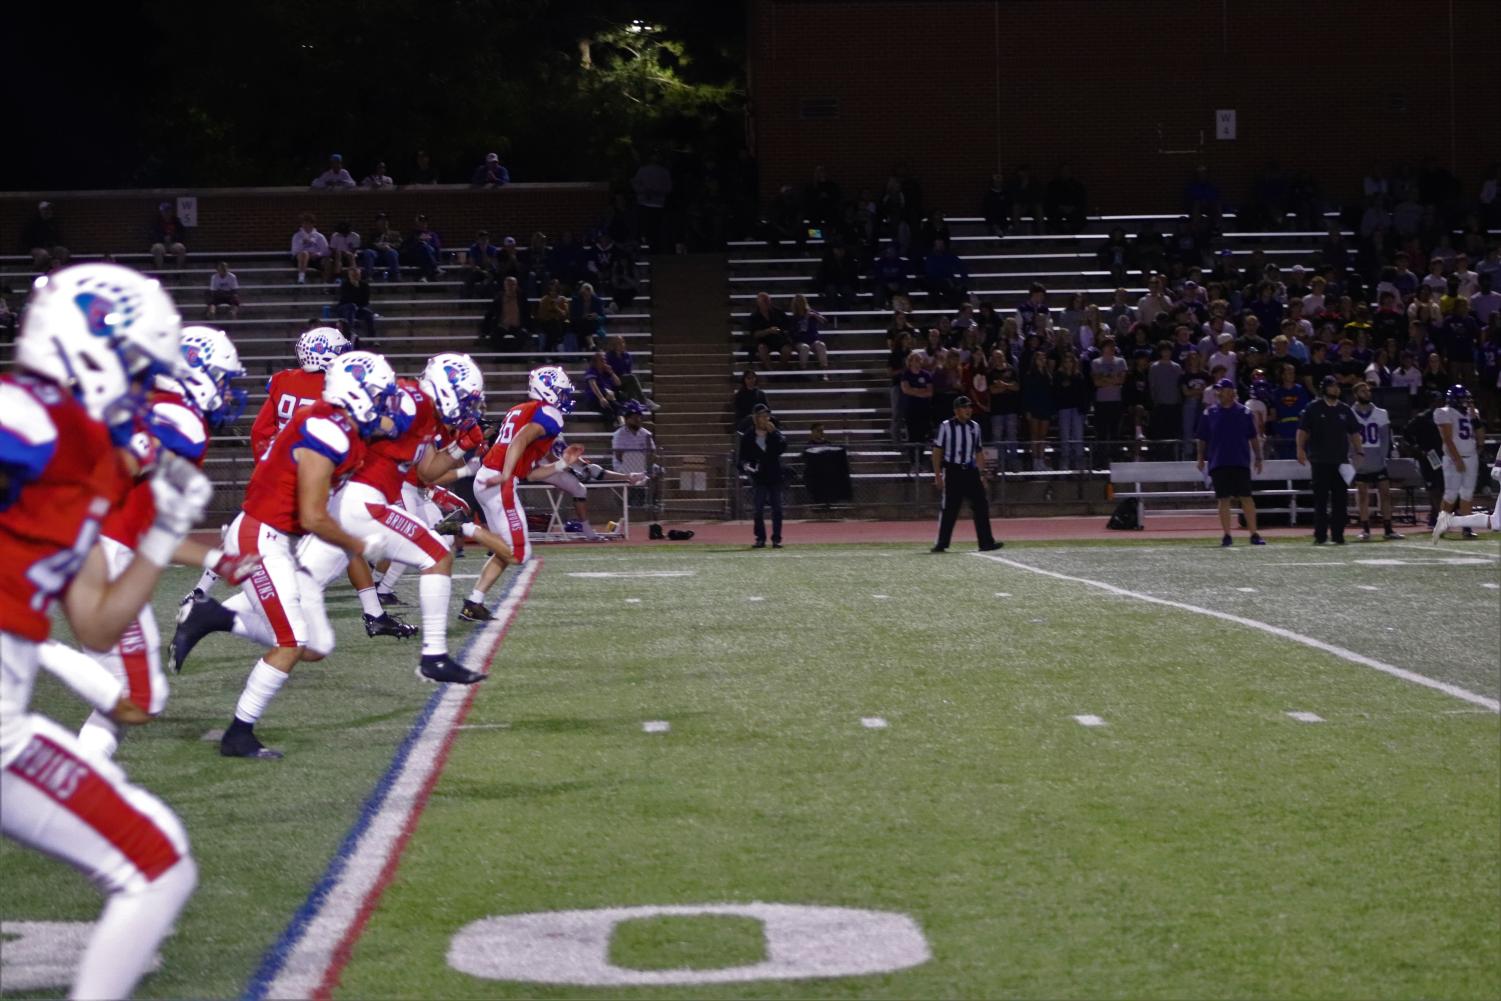 Creek+Dominates+Arvada+West+in+Homecoming+Football+Game%3A+See+Moments+Here